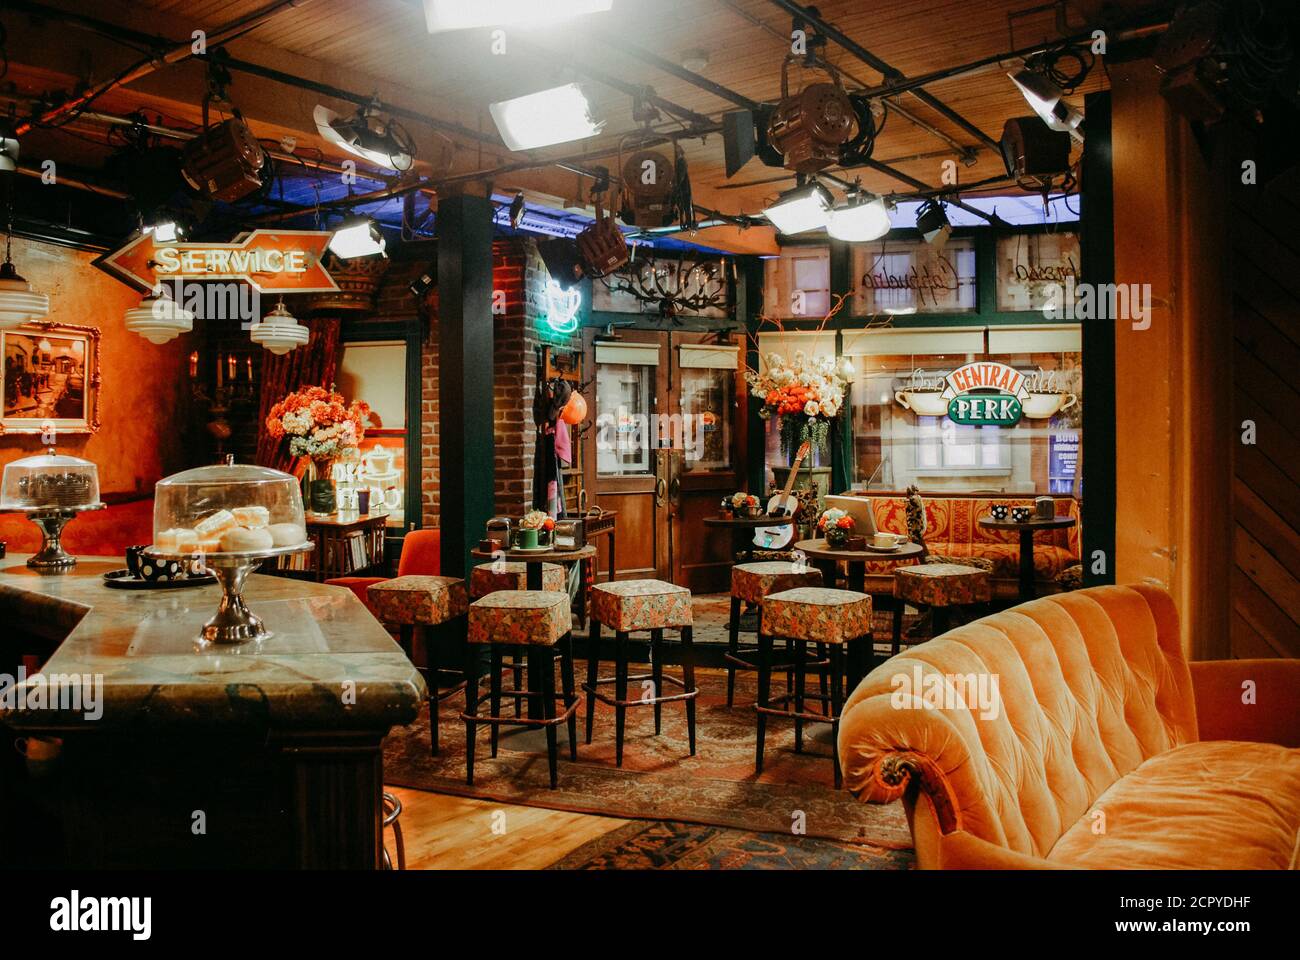 Friends Central Perk pop-up opening in Los Angeles